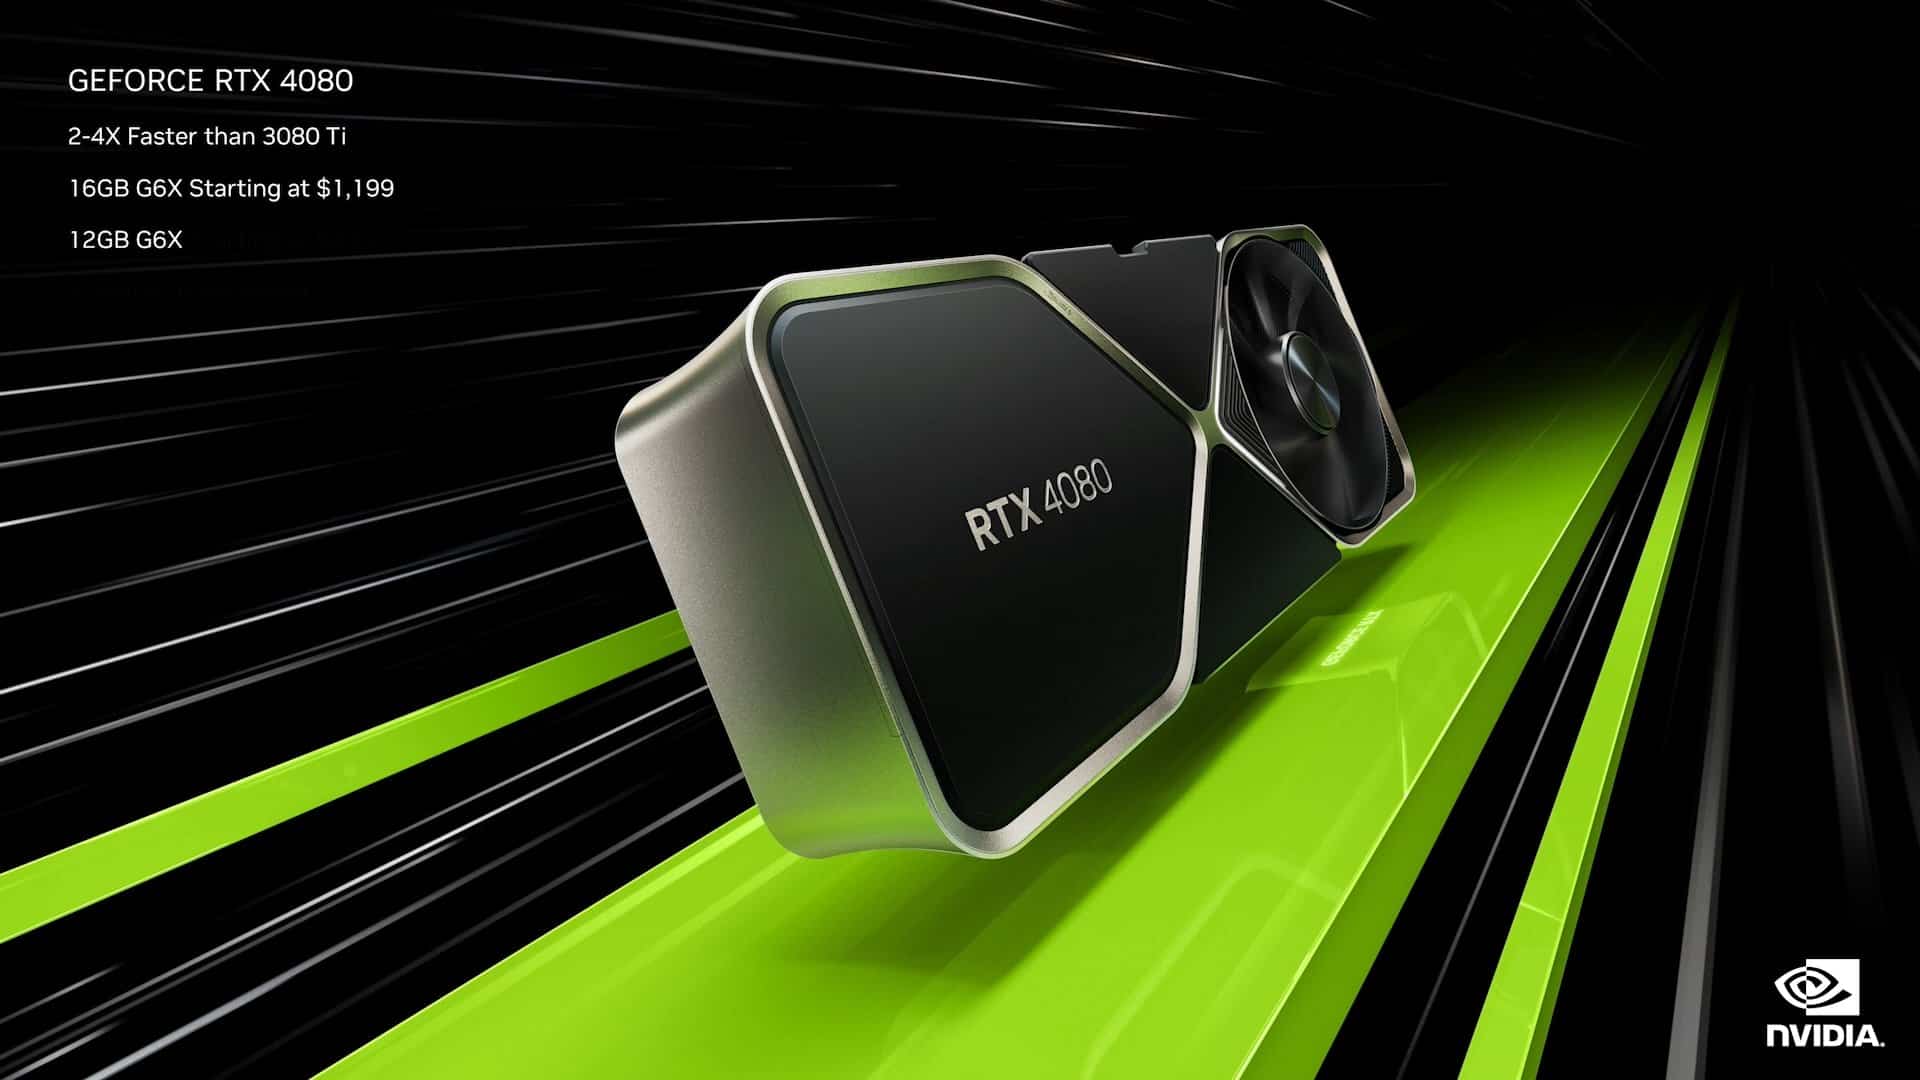 NVIDIA confirms it will not launch the RTX 4080 12GB, the RTX 4080 16GB will launch this November 16